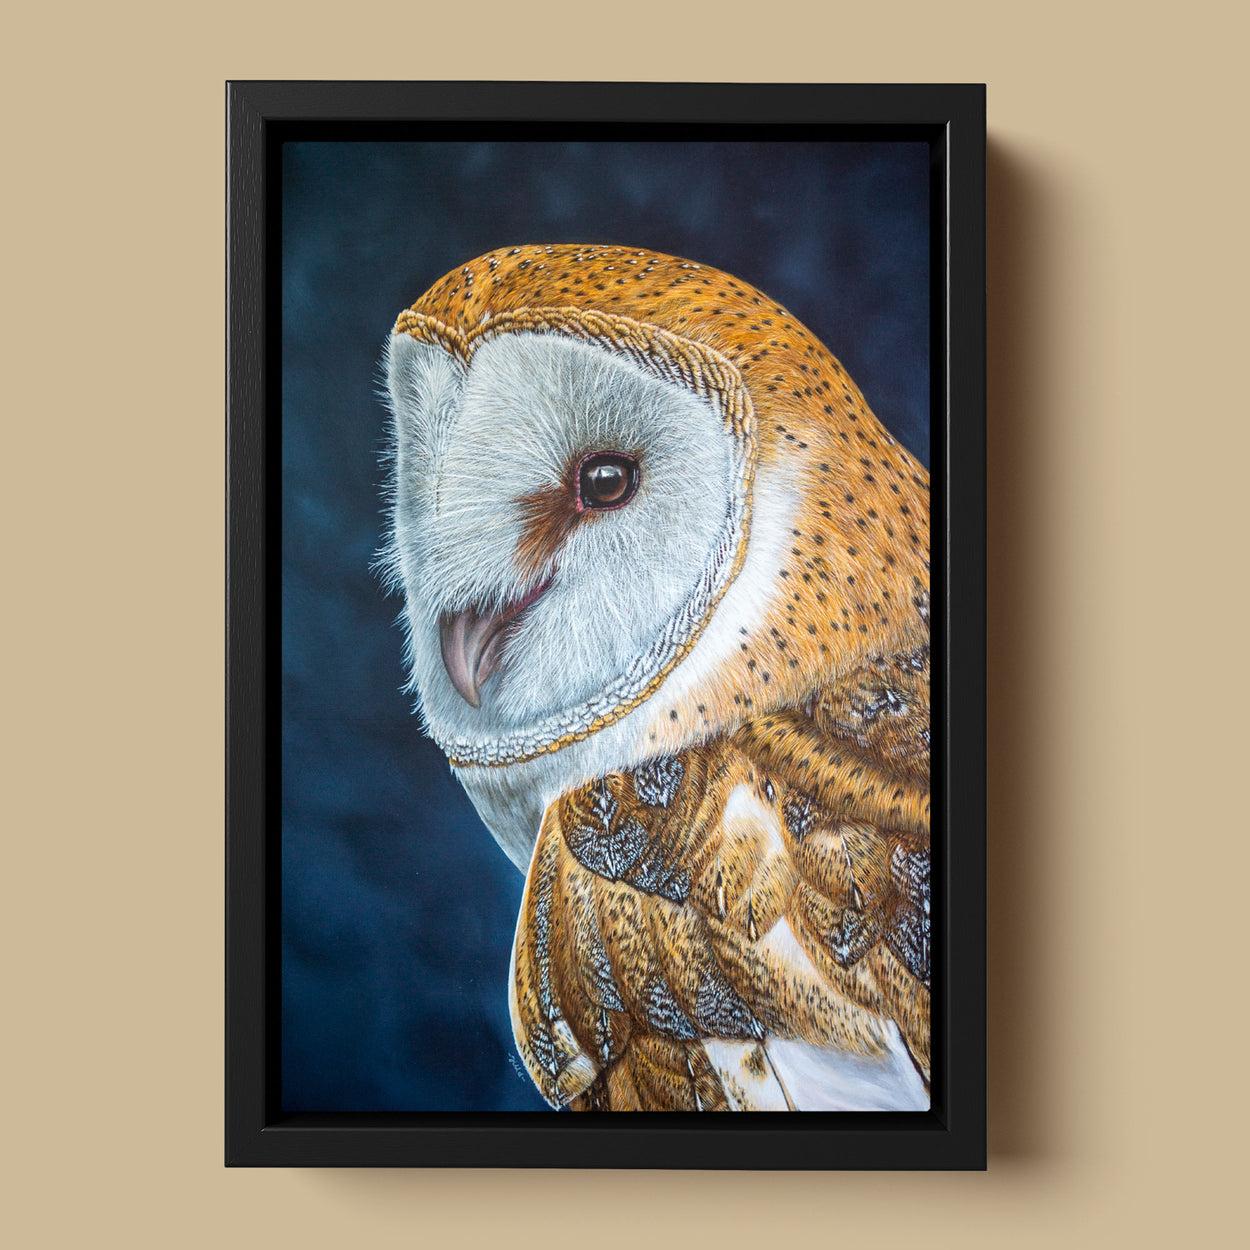 Barn Owl Oil Painting in Frame - Jill Dimond The Thriving Wild